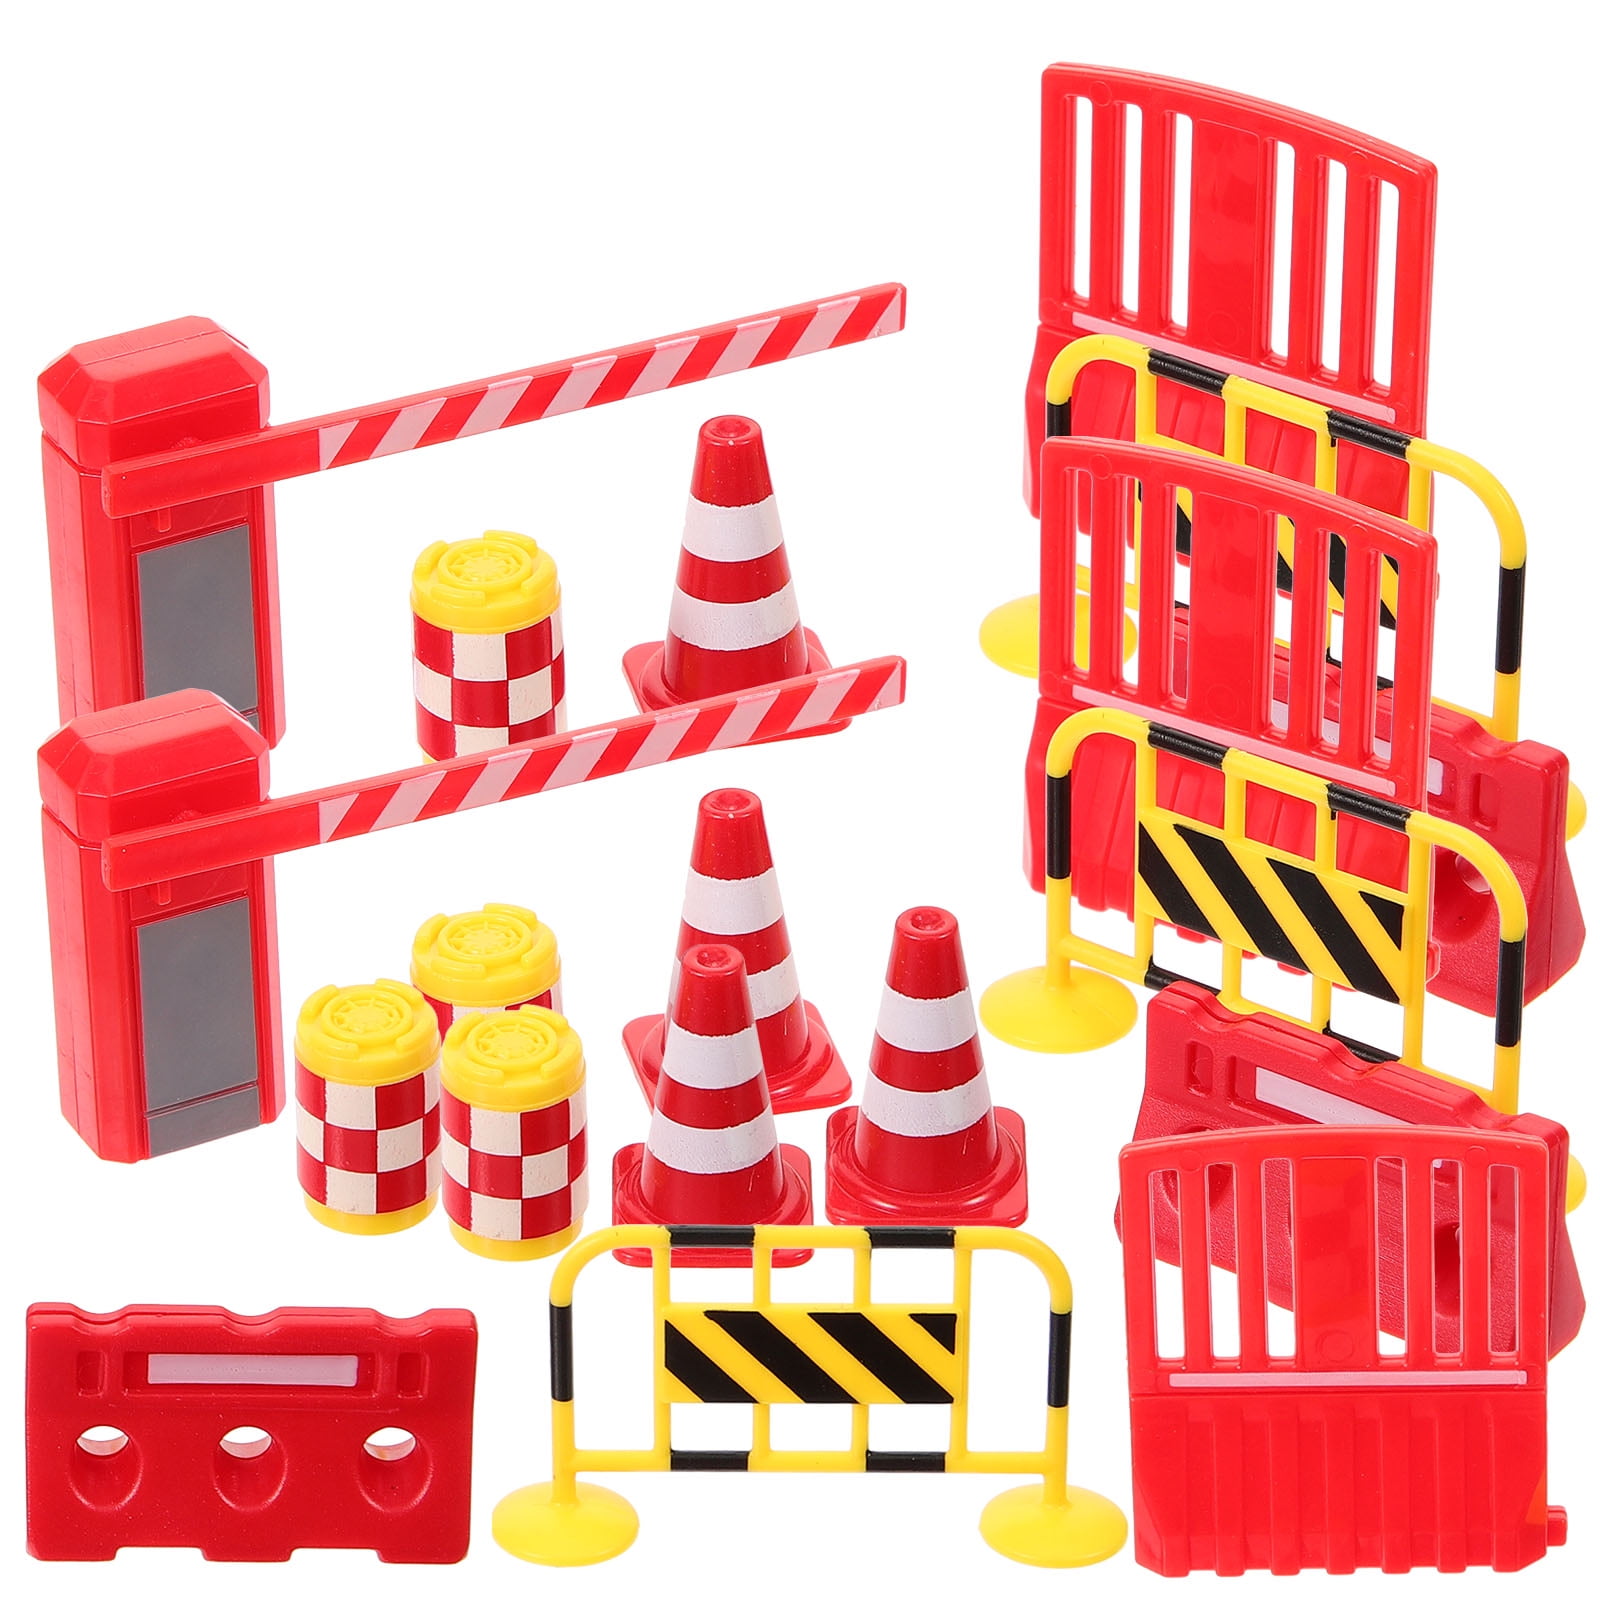 Parking Lot Road Sign Traffic Models Toy Miniature Barricade Teaching ...